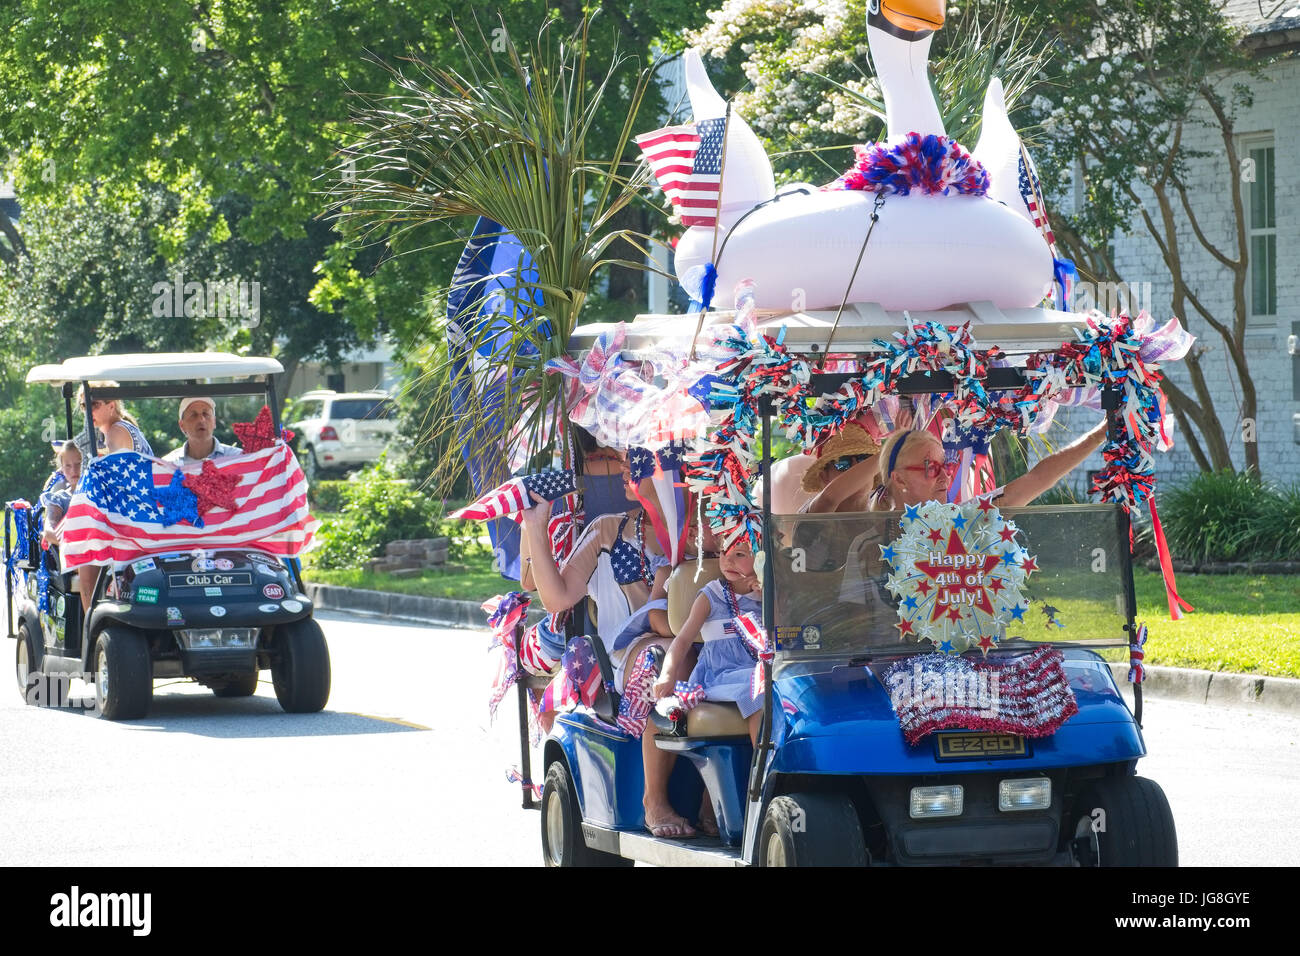 Sullivan's Island, South Carolina, USA. 4th July, 2017. Families ride decorated golf cart during the annual Sullivan's Island Independence Day parade July 4, 2017 in Sullivan's Island, South Carolina. The tiny affluent sea island hosts a bicycle and golf cart parade through the historic village. Credit: Planetpix/Alamy Live News Stock Photo